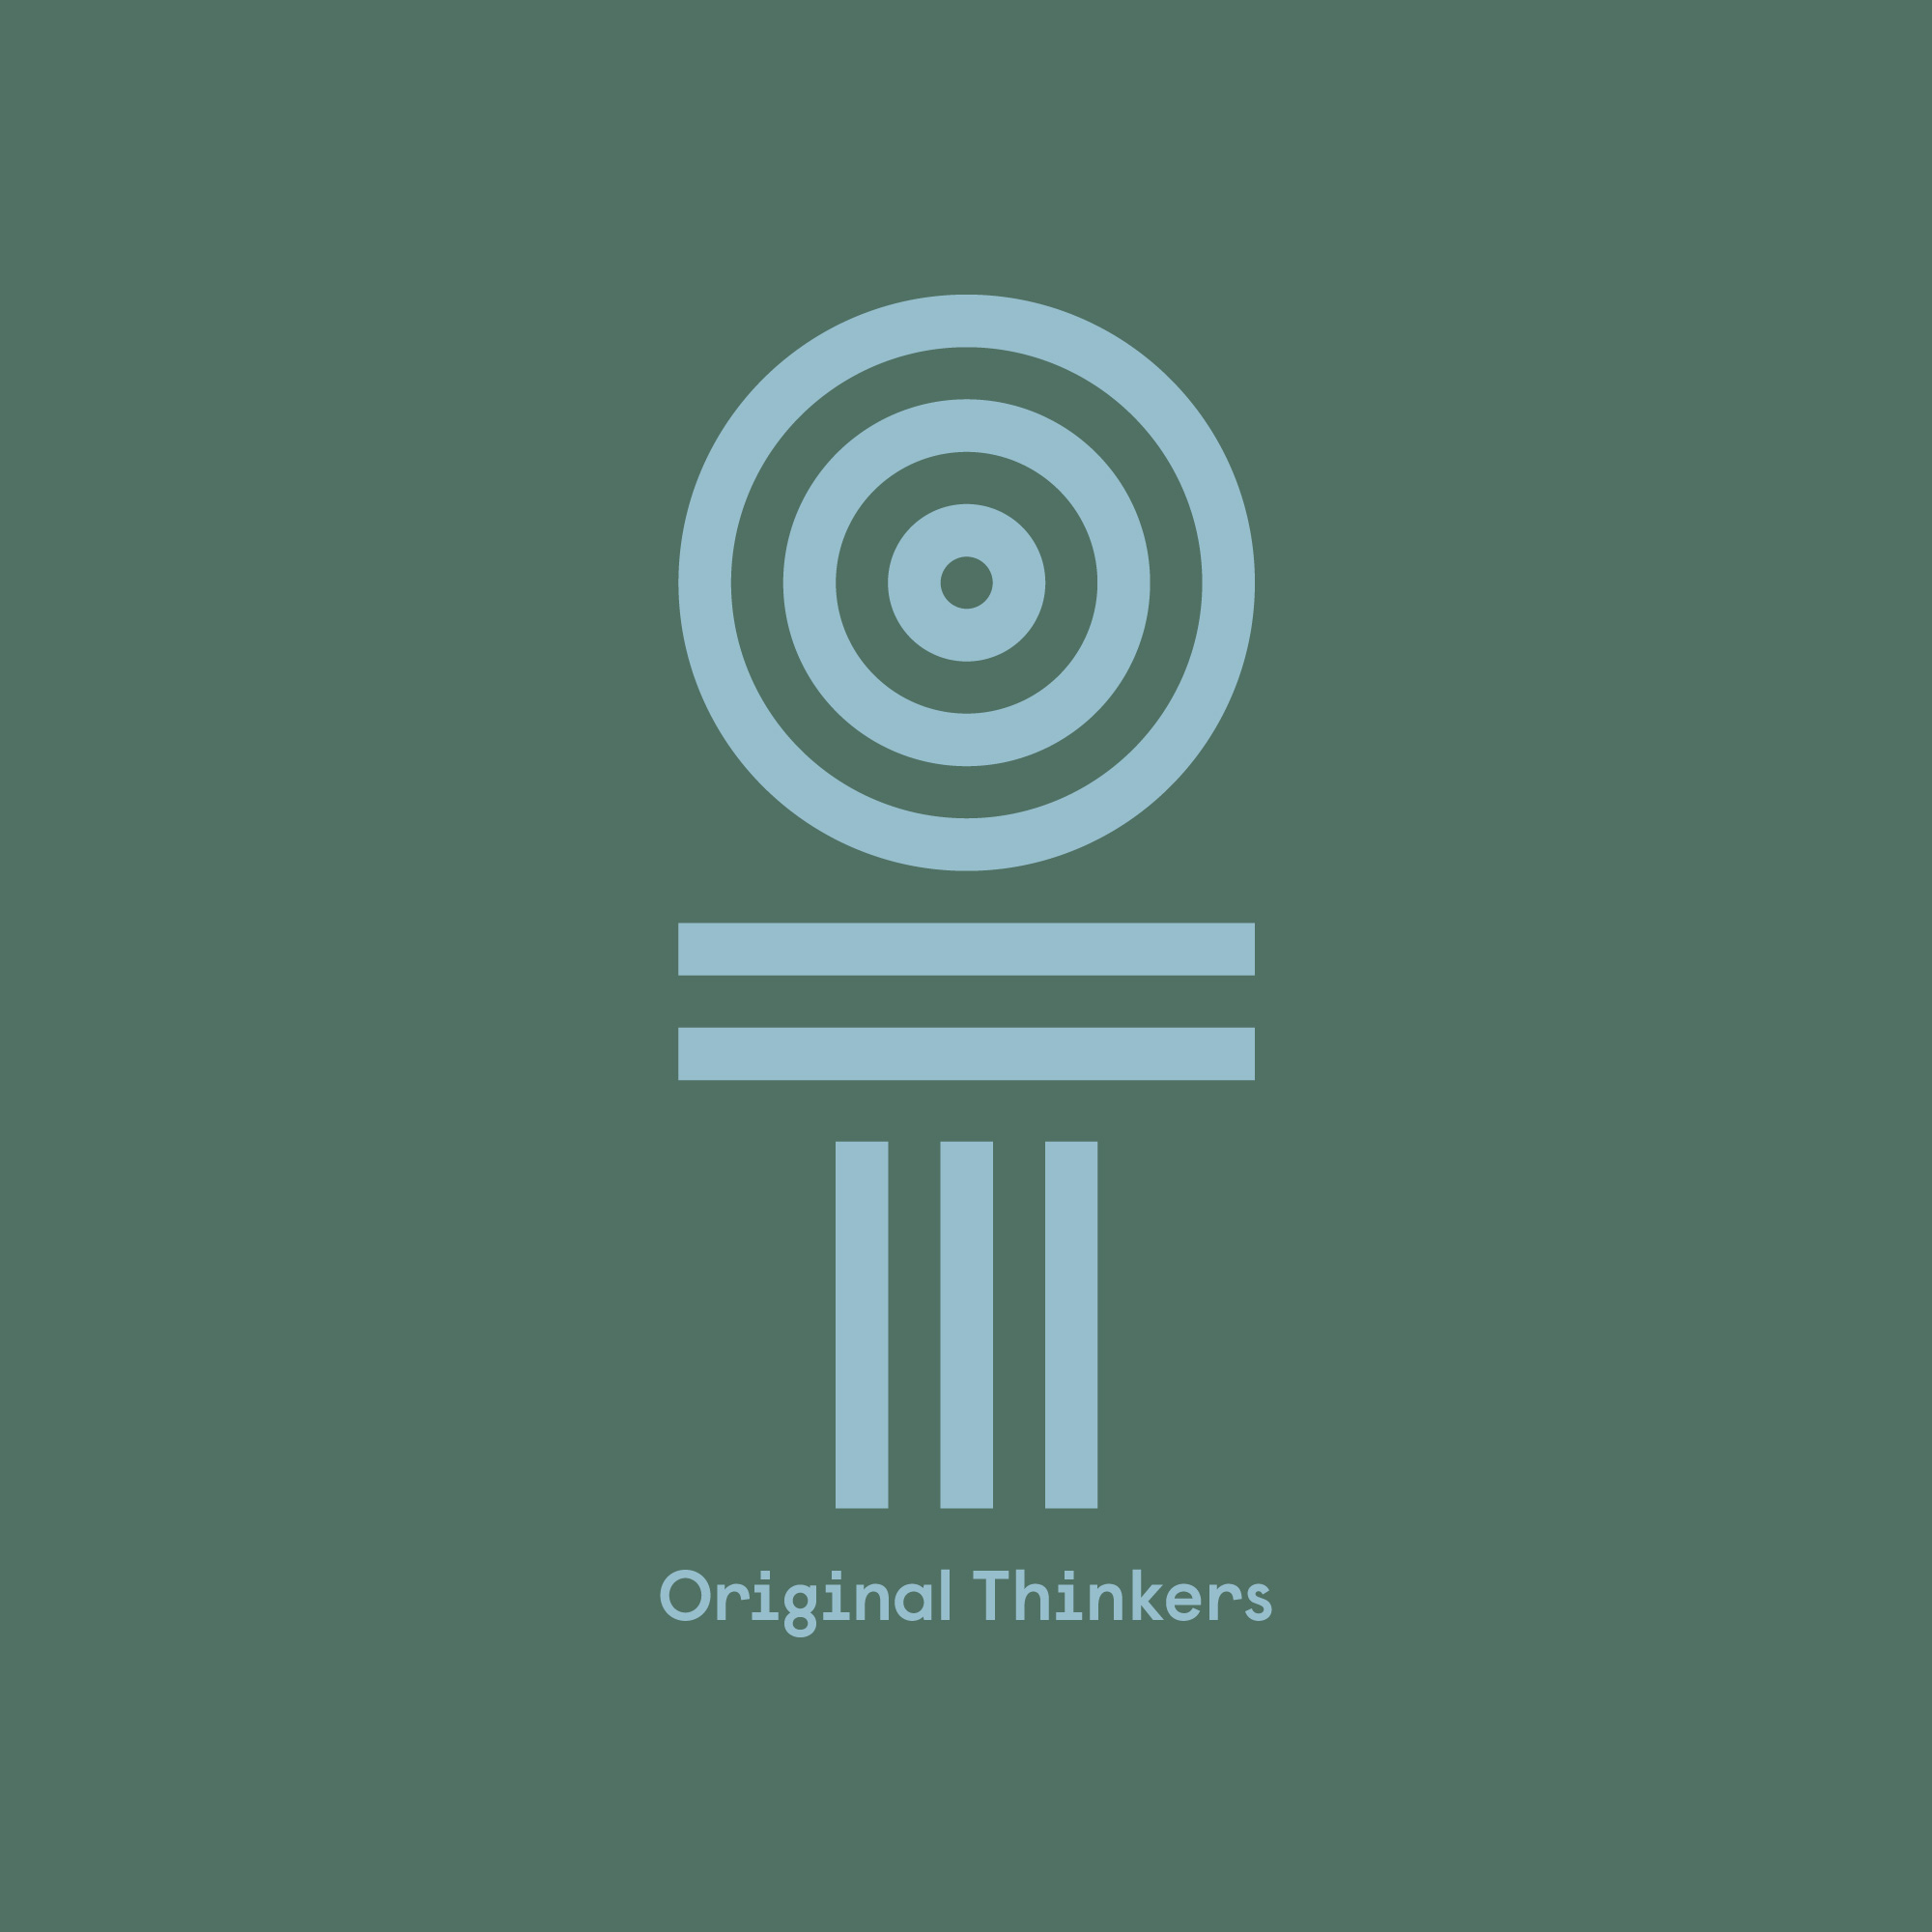 Green and blue original thinkers logo,a blue bullseye sitting on top of a column on a green background